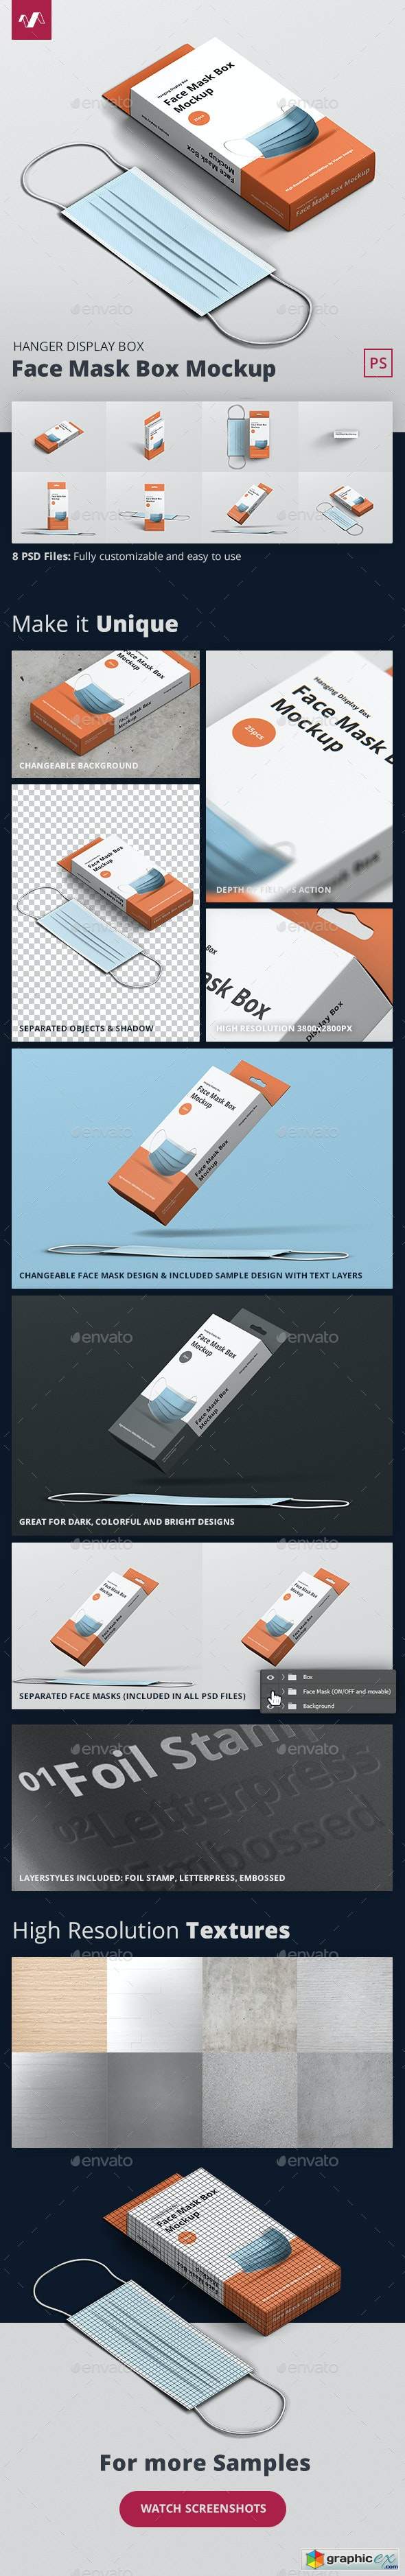 Download Face Mask Box Mockup Hanger Free Download Vector Stock Image Photoshop Icon